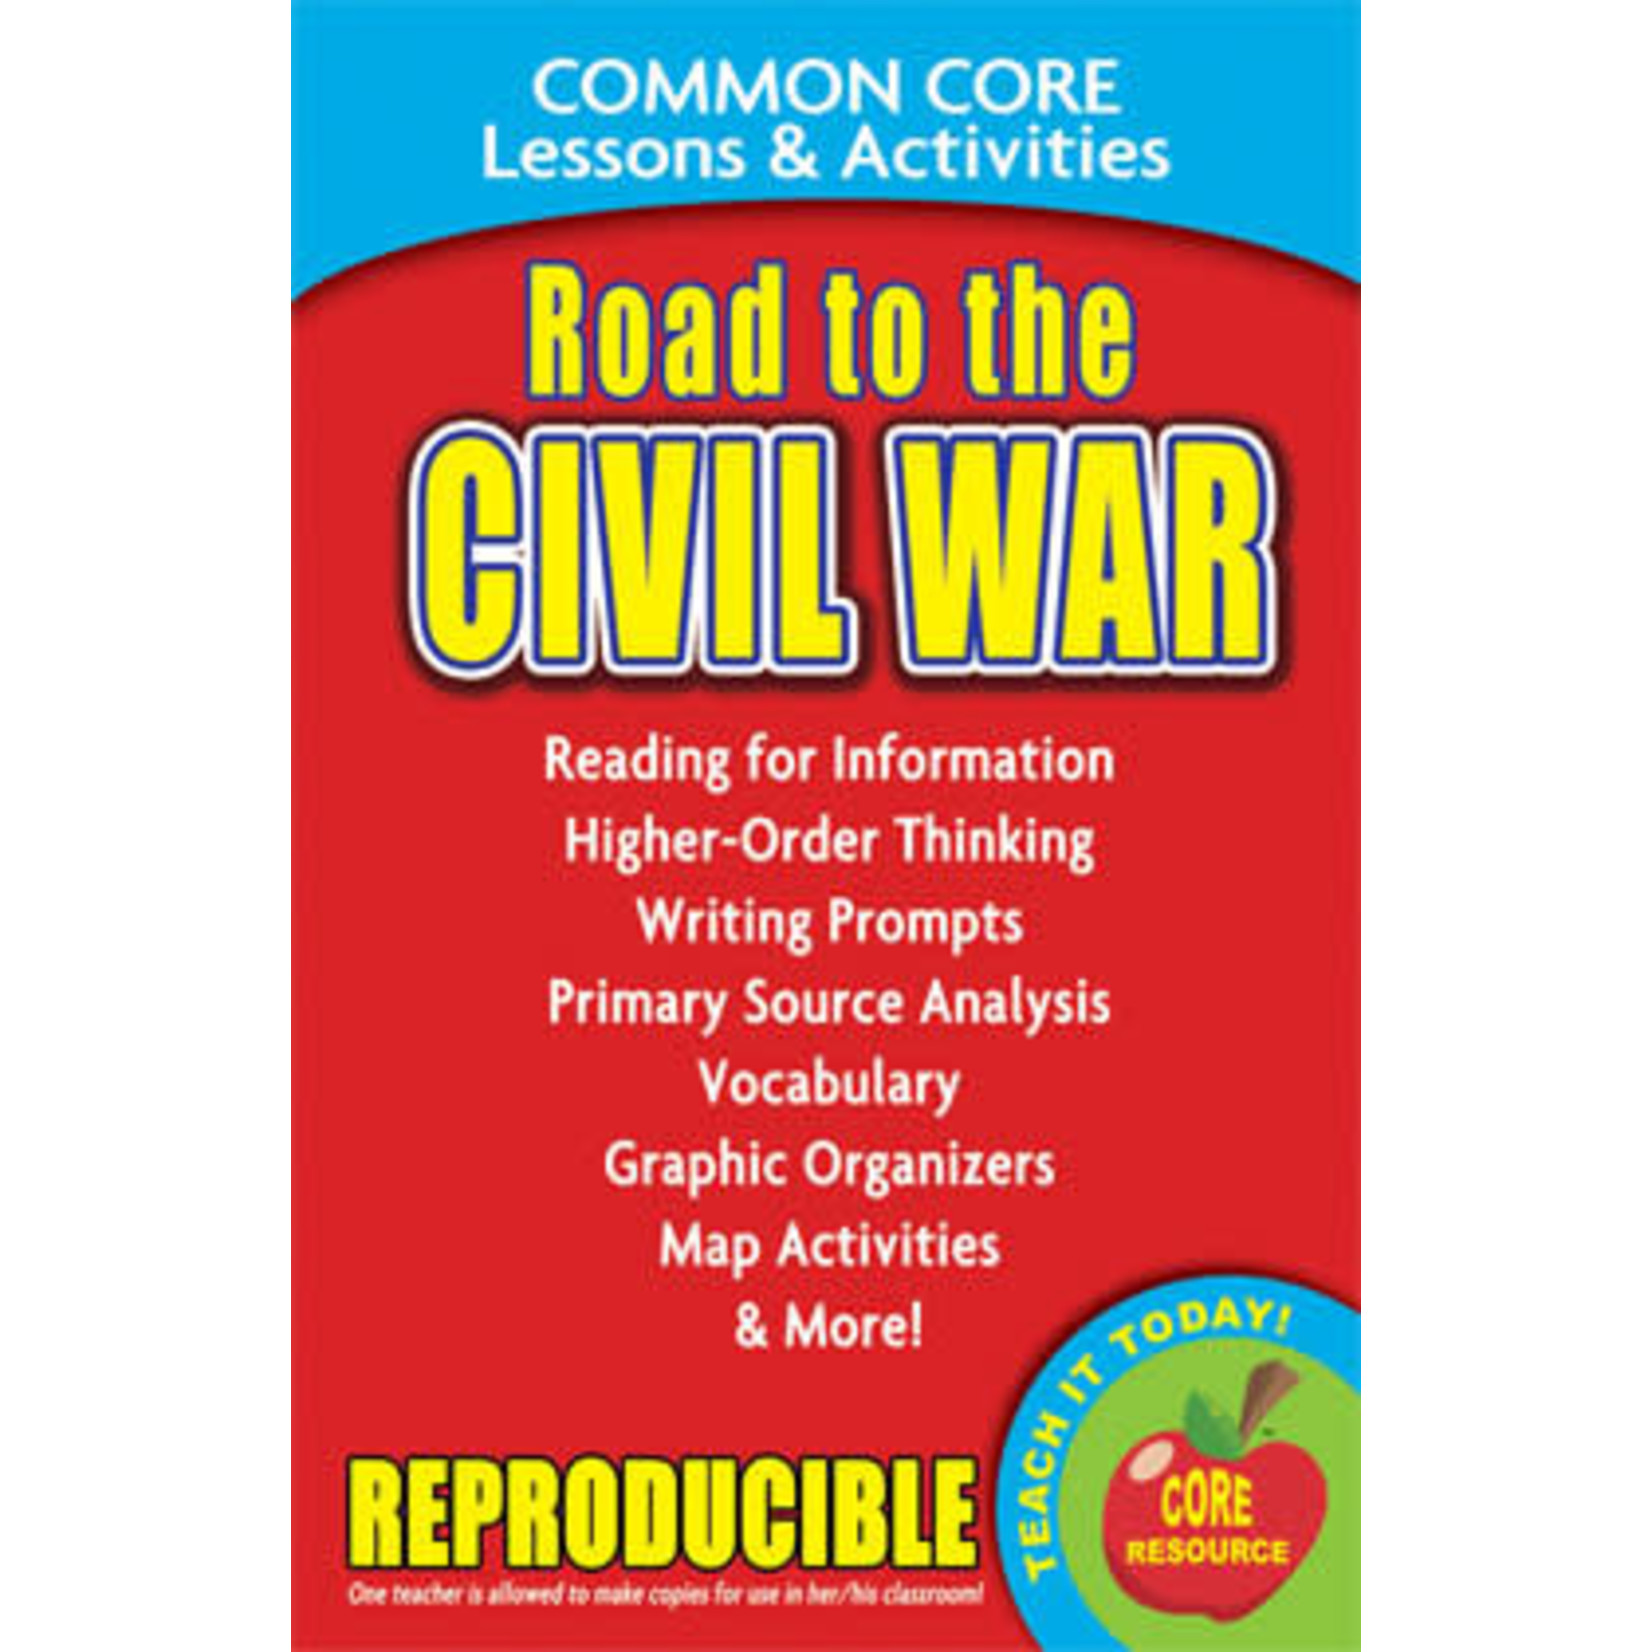 Road to the Civil War – Common Core Lessons & Activities